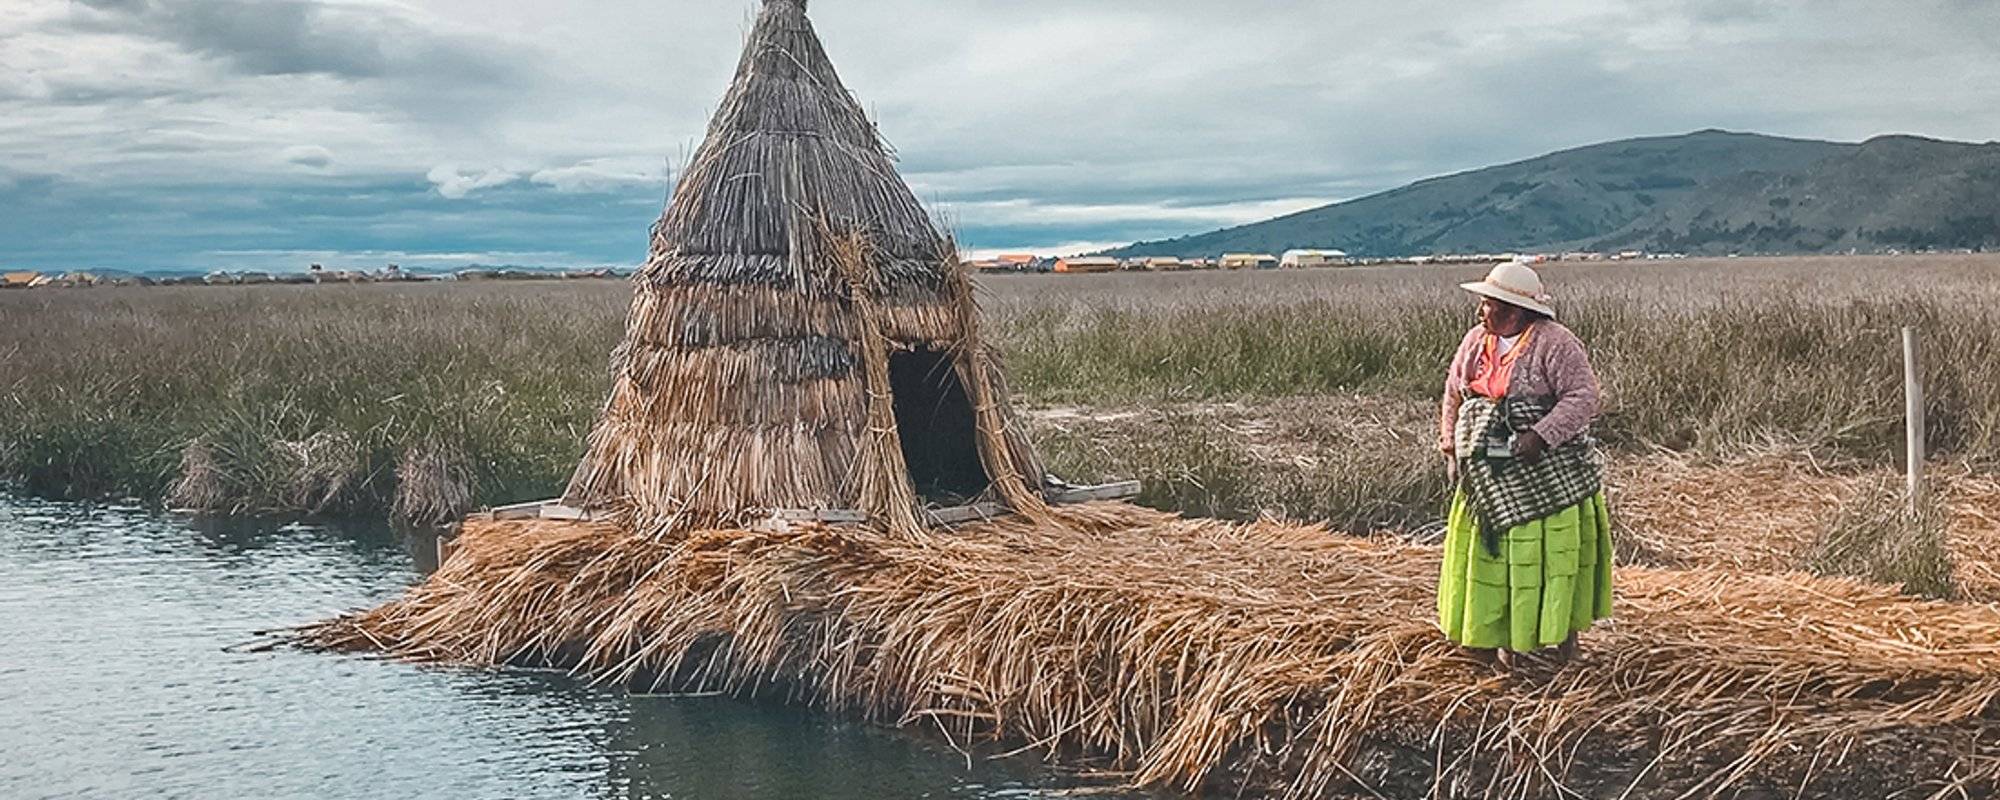 EXPLORING THE "FLOATING ISLANDS" OF LAKE TITICACA  - THE HIGHEST "NAVIGABLE" LAKE IN THE WORLD !